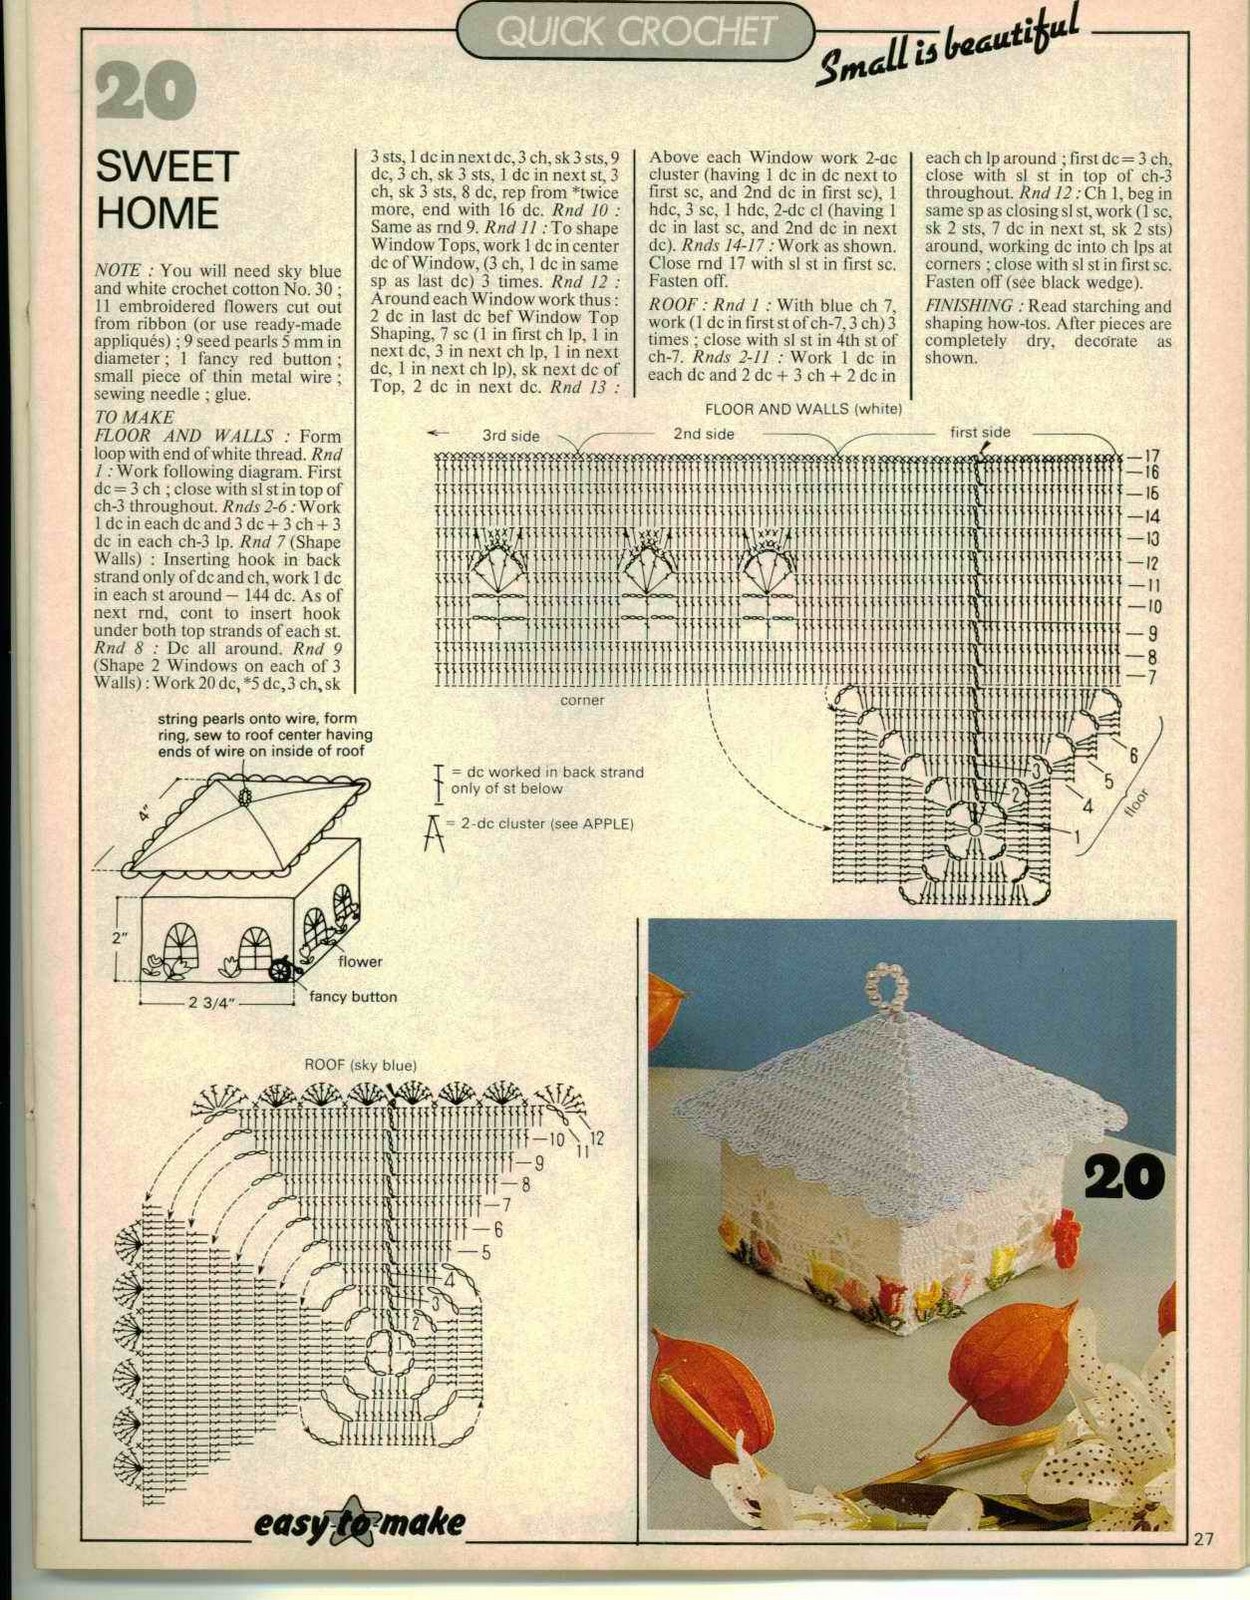 Crochet starched box shaped house